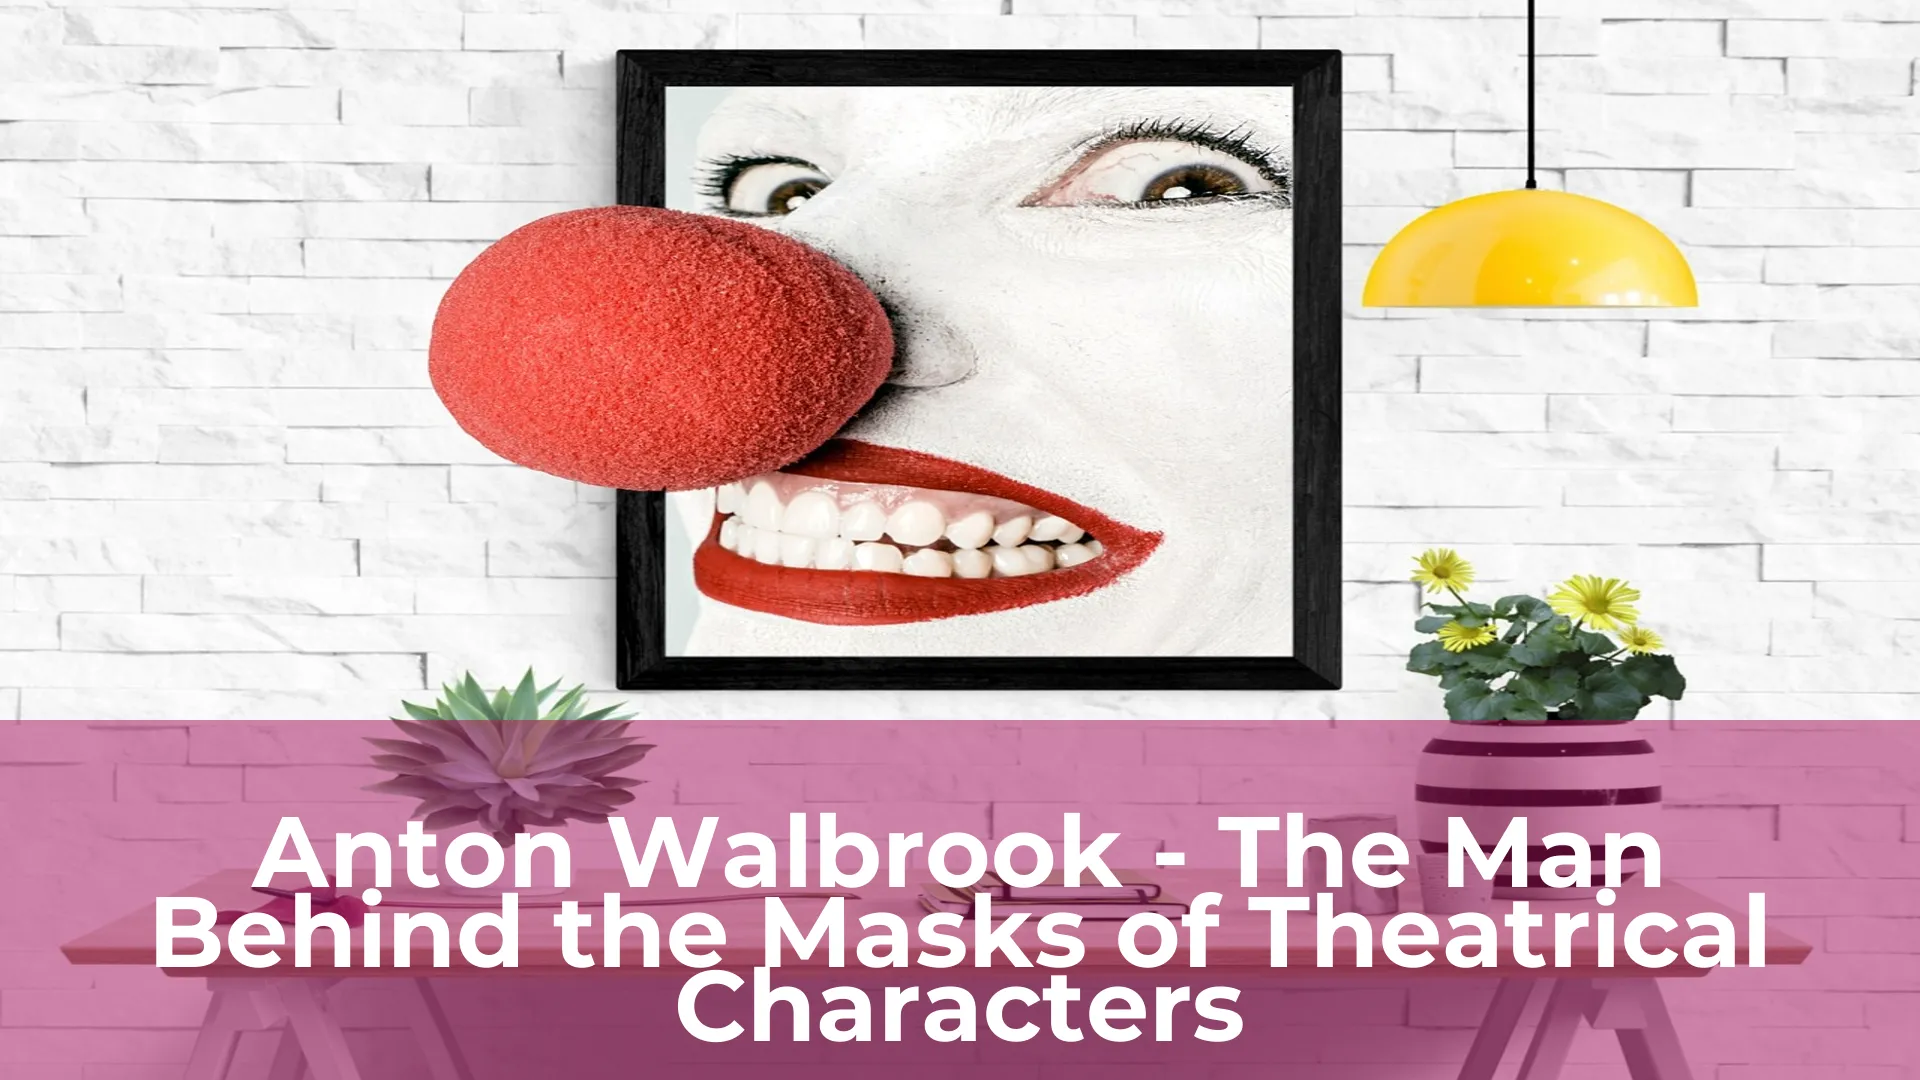 Anton walbrook the man behind the masks of theatrical characters